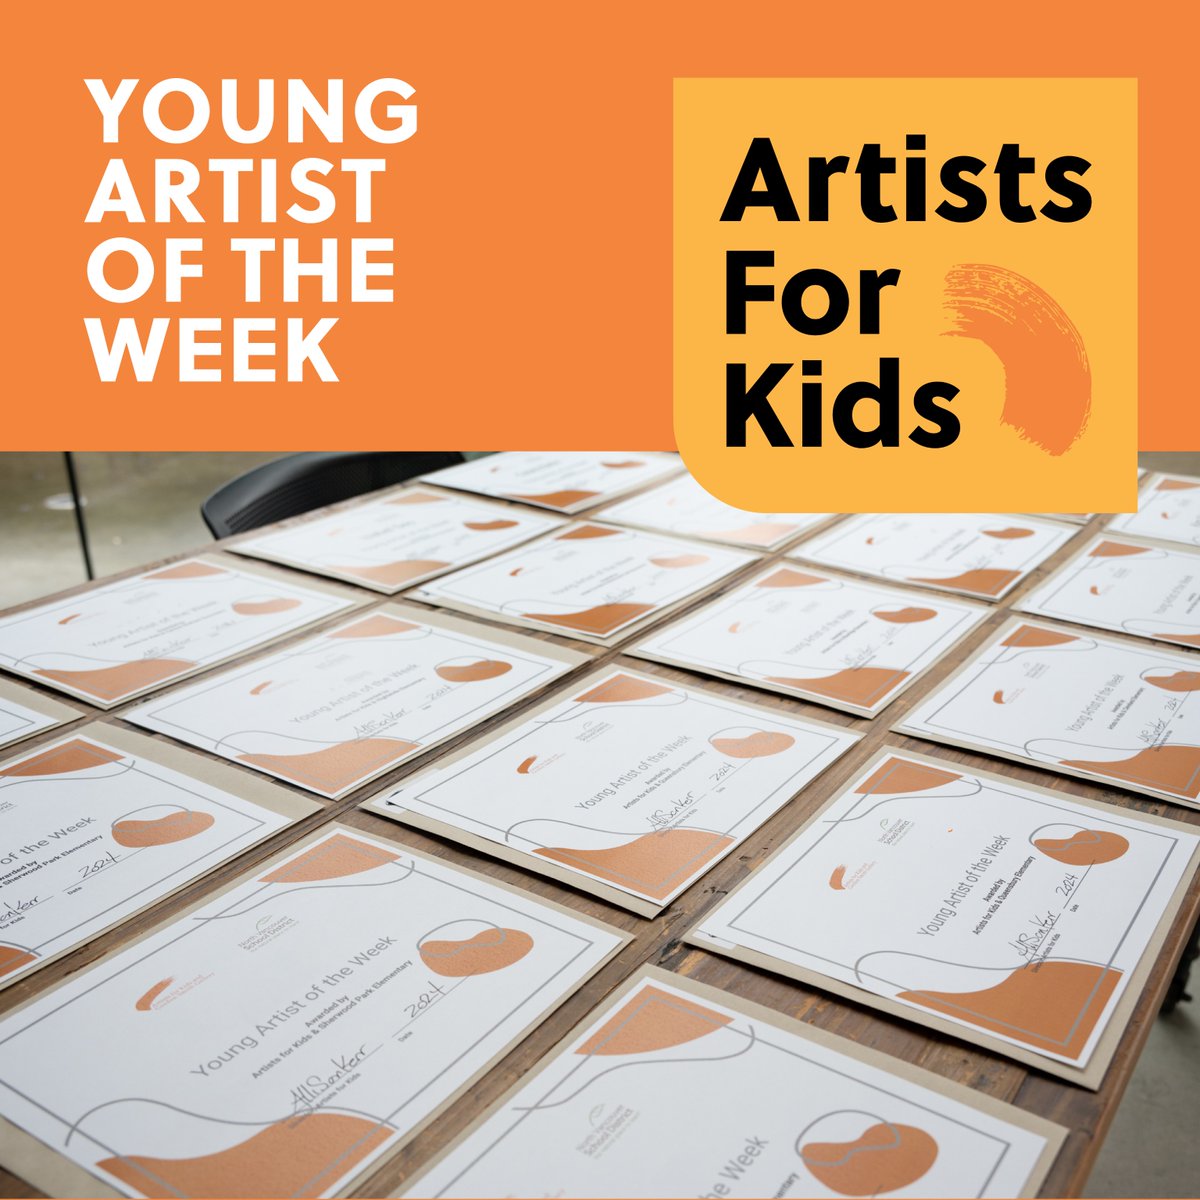 Over the coming weeks we will be celebrating our 2024 #YoungArtistsOfTheWeek! This program provides valuable recognition to our student artists and raises public awareness of the importance of arts education in our schools. @NVSD44 #ArtistsForKids Photo by Khim Hipol